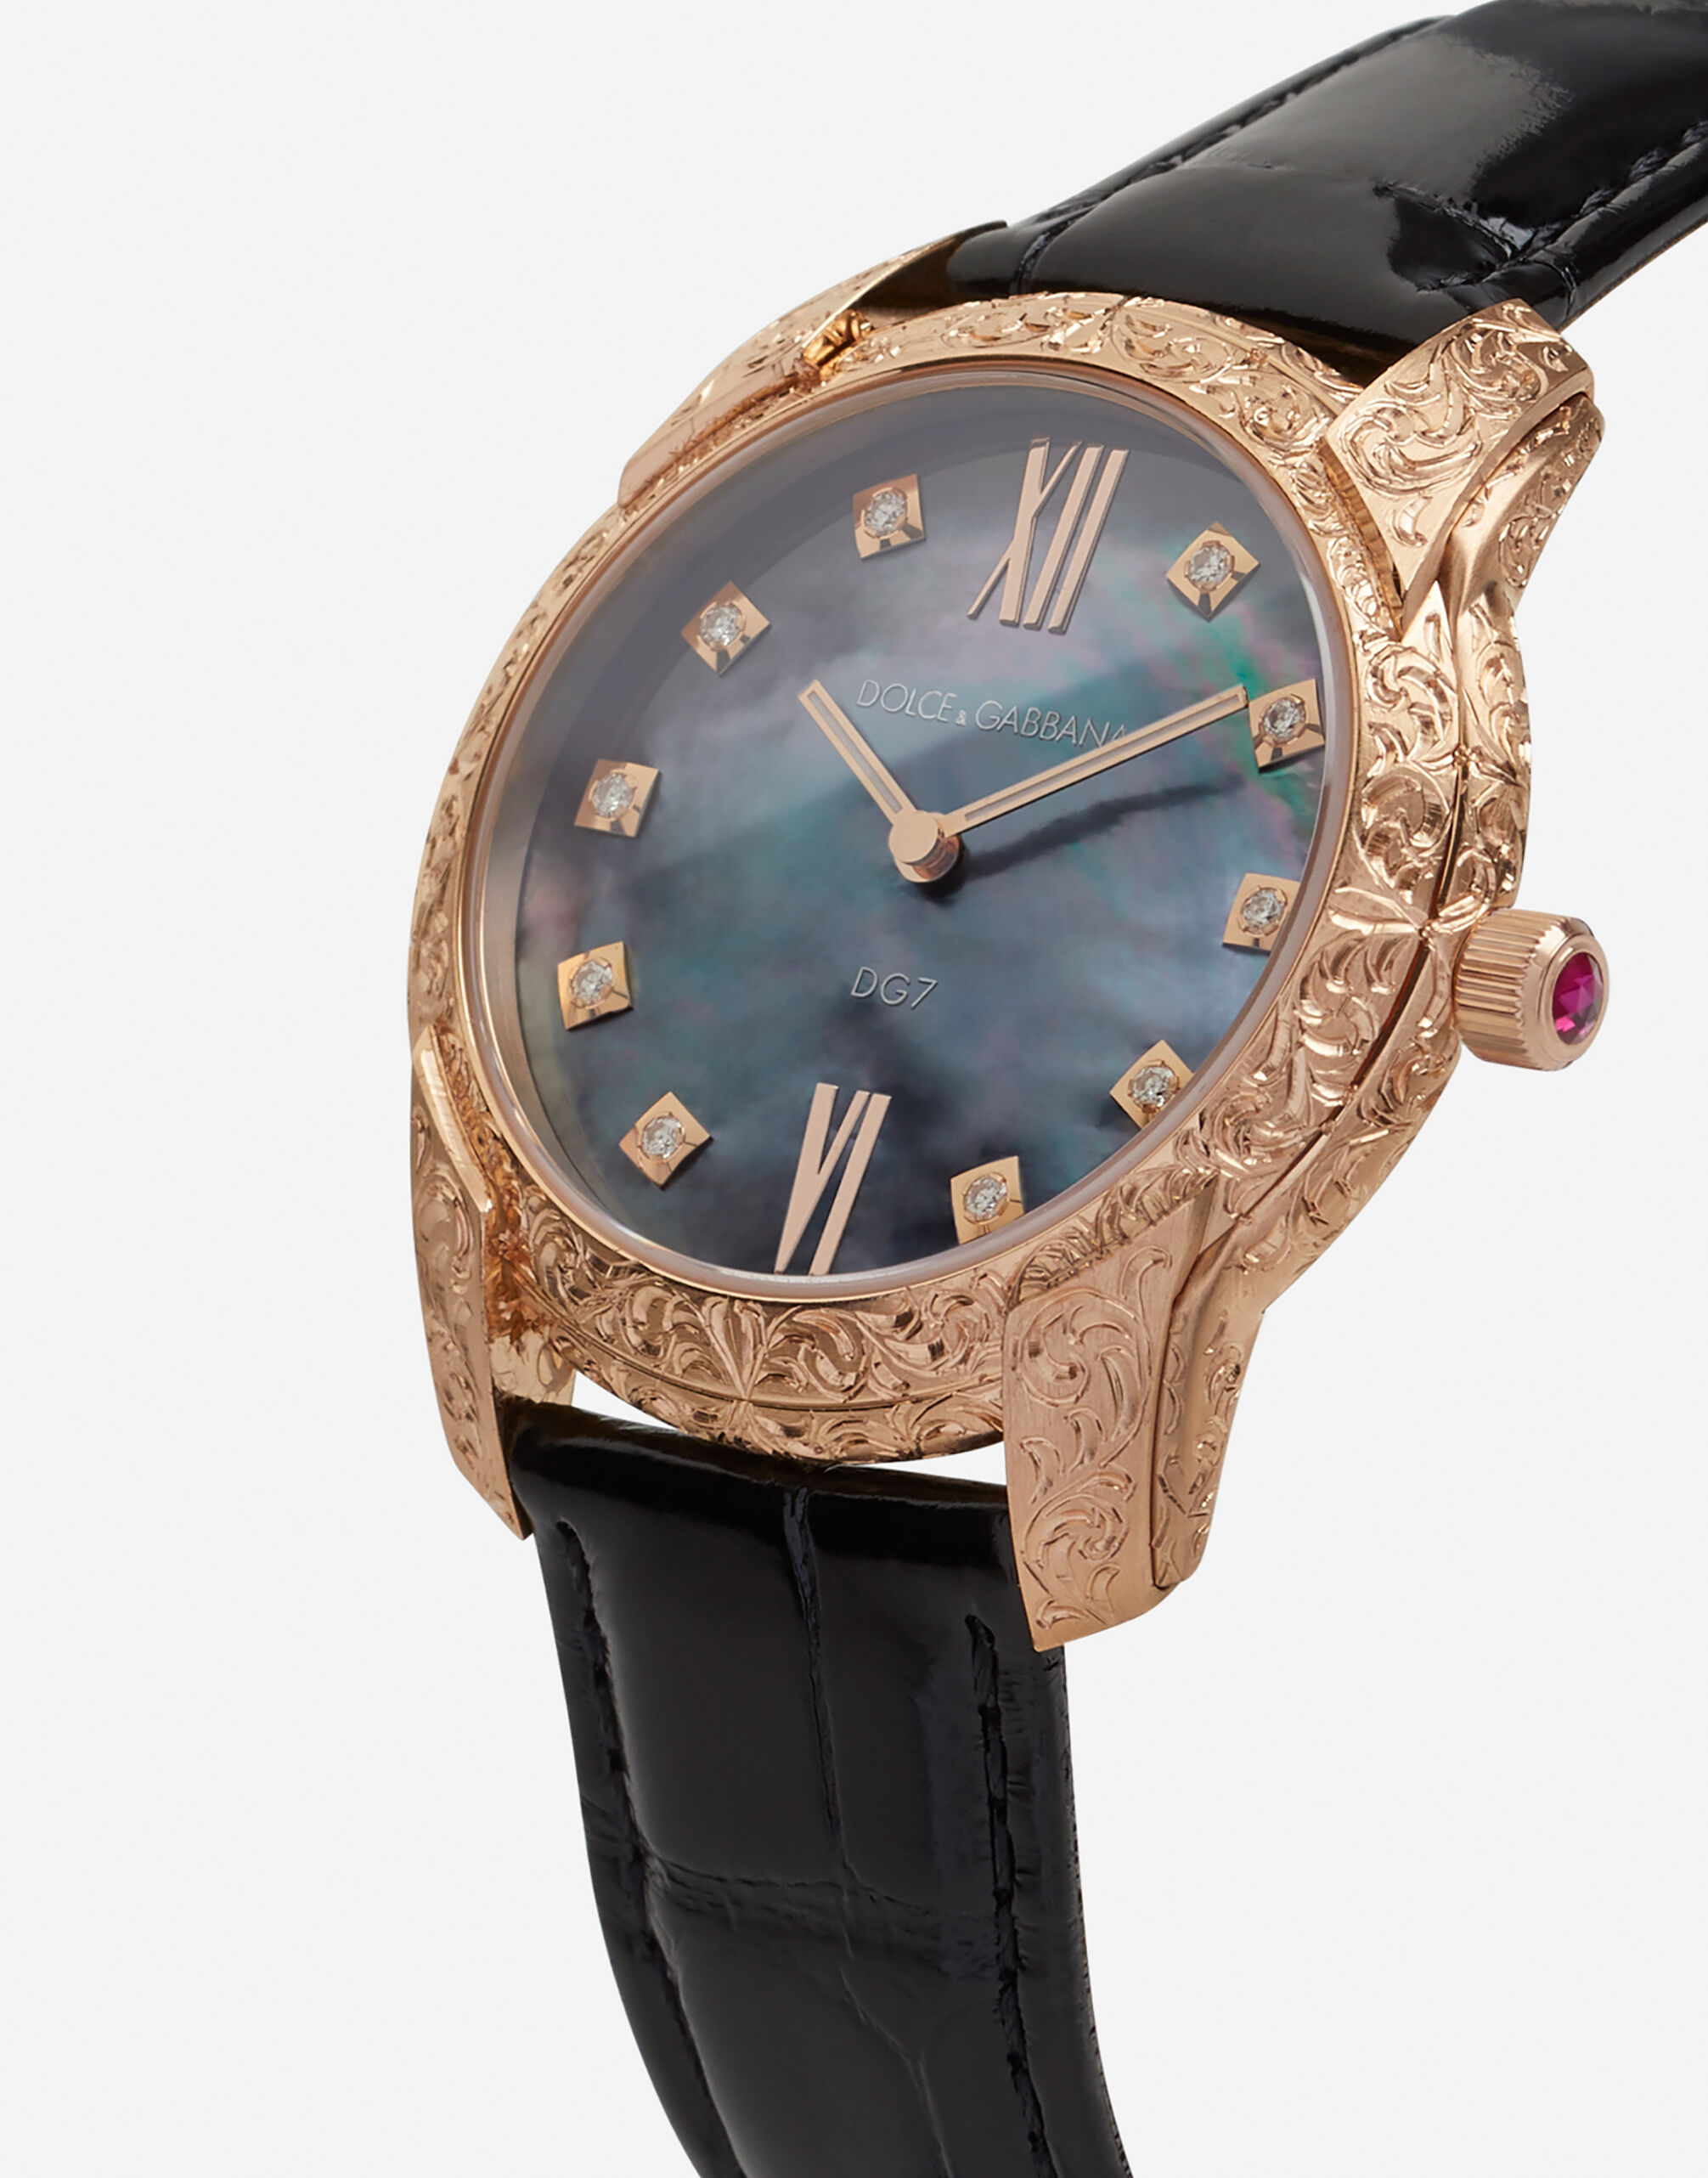 DG7 Gattopardo watch in red gold with black mother of pearl and